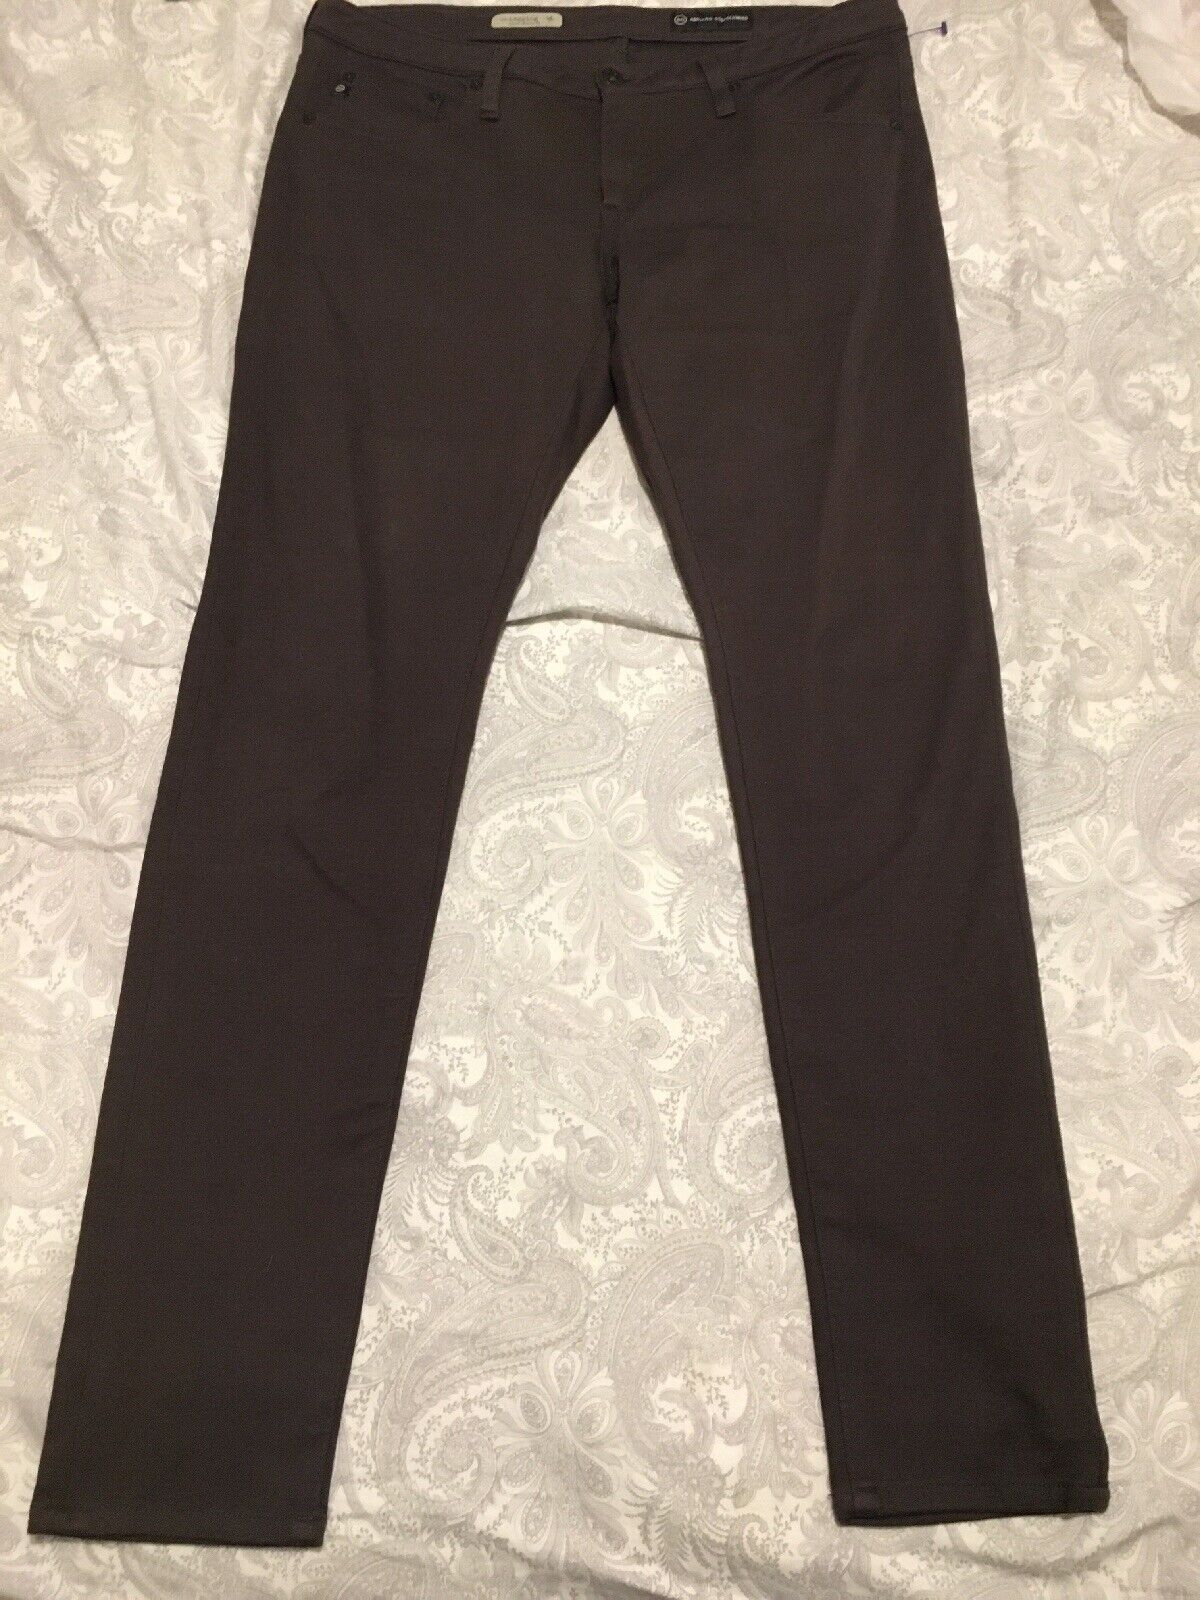 Womens AG Adriano Indefinitely Goldschmied Jeans Pants Translated Su Size The 32 Legging